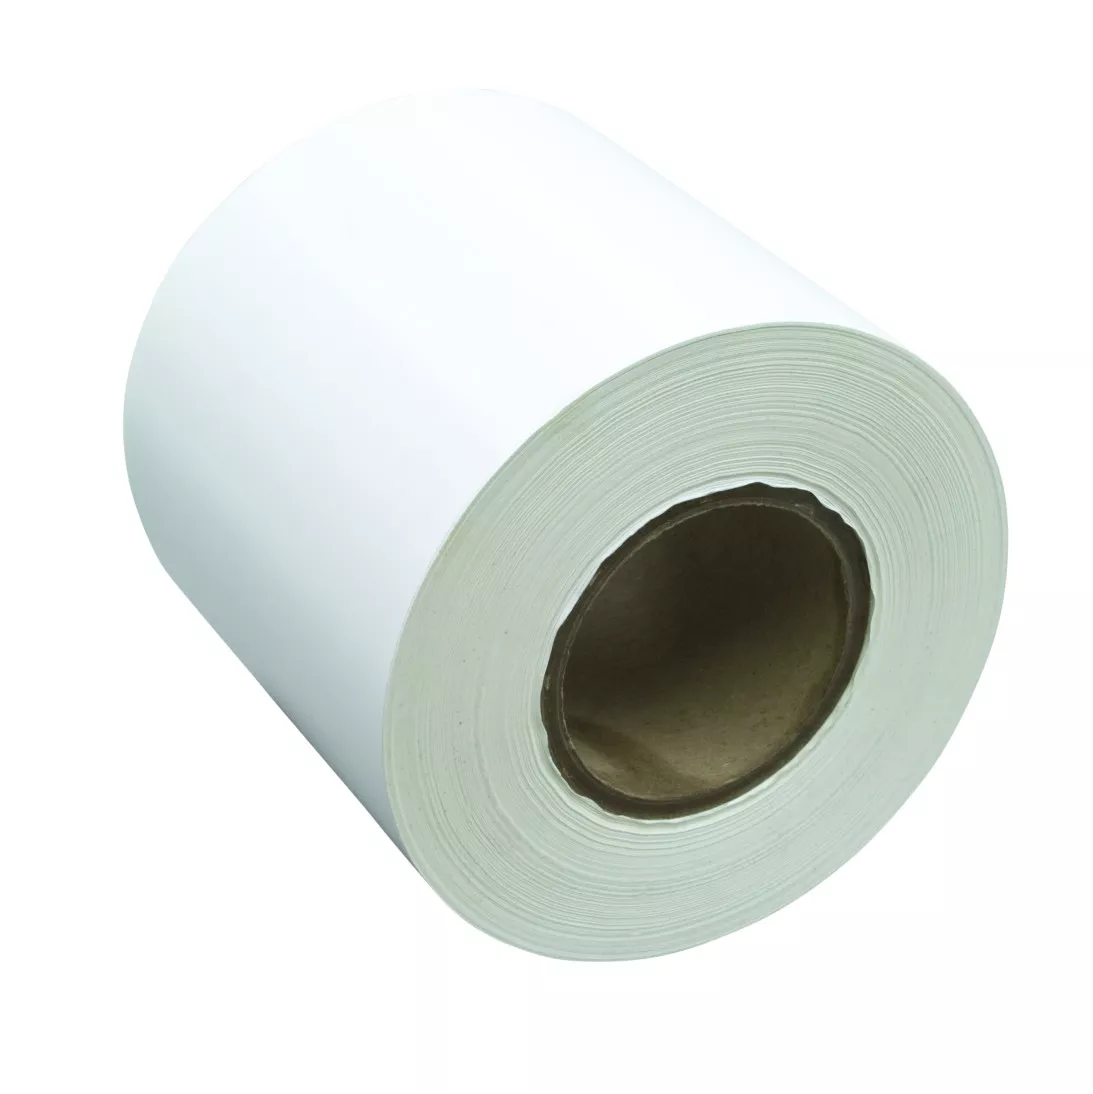 3M™ Sheet and Screen Label Material 7901, Soft White Vinyl, 20 in x 27
in, 100 sheets per case